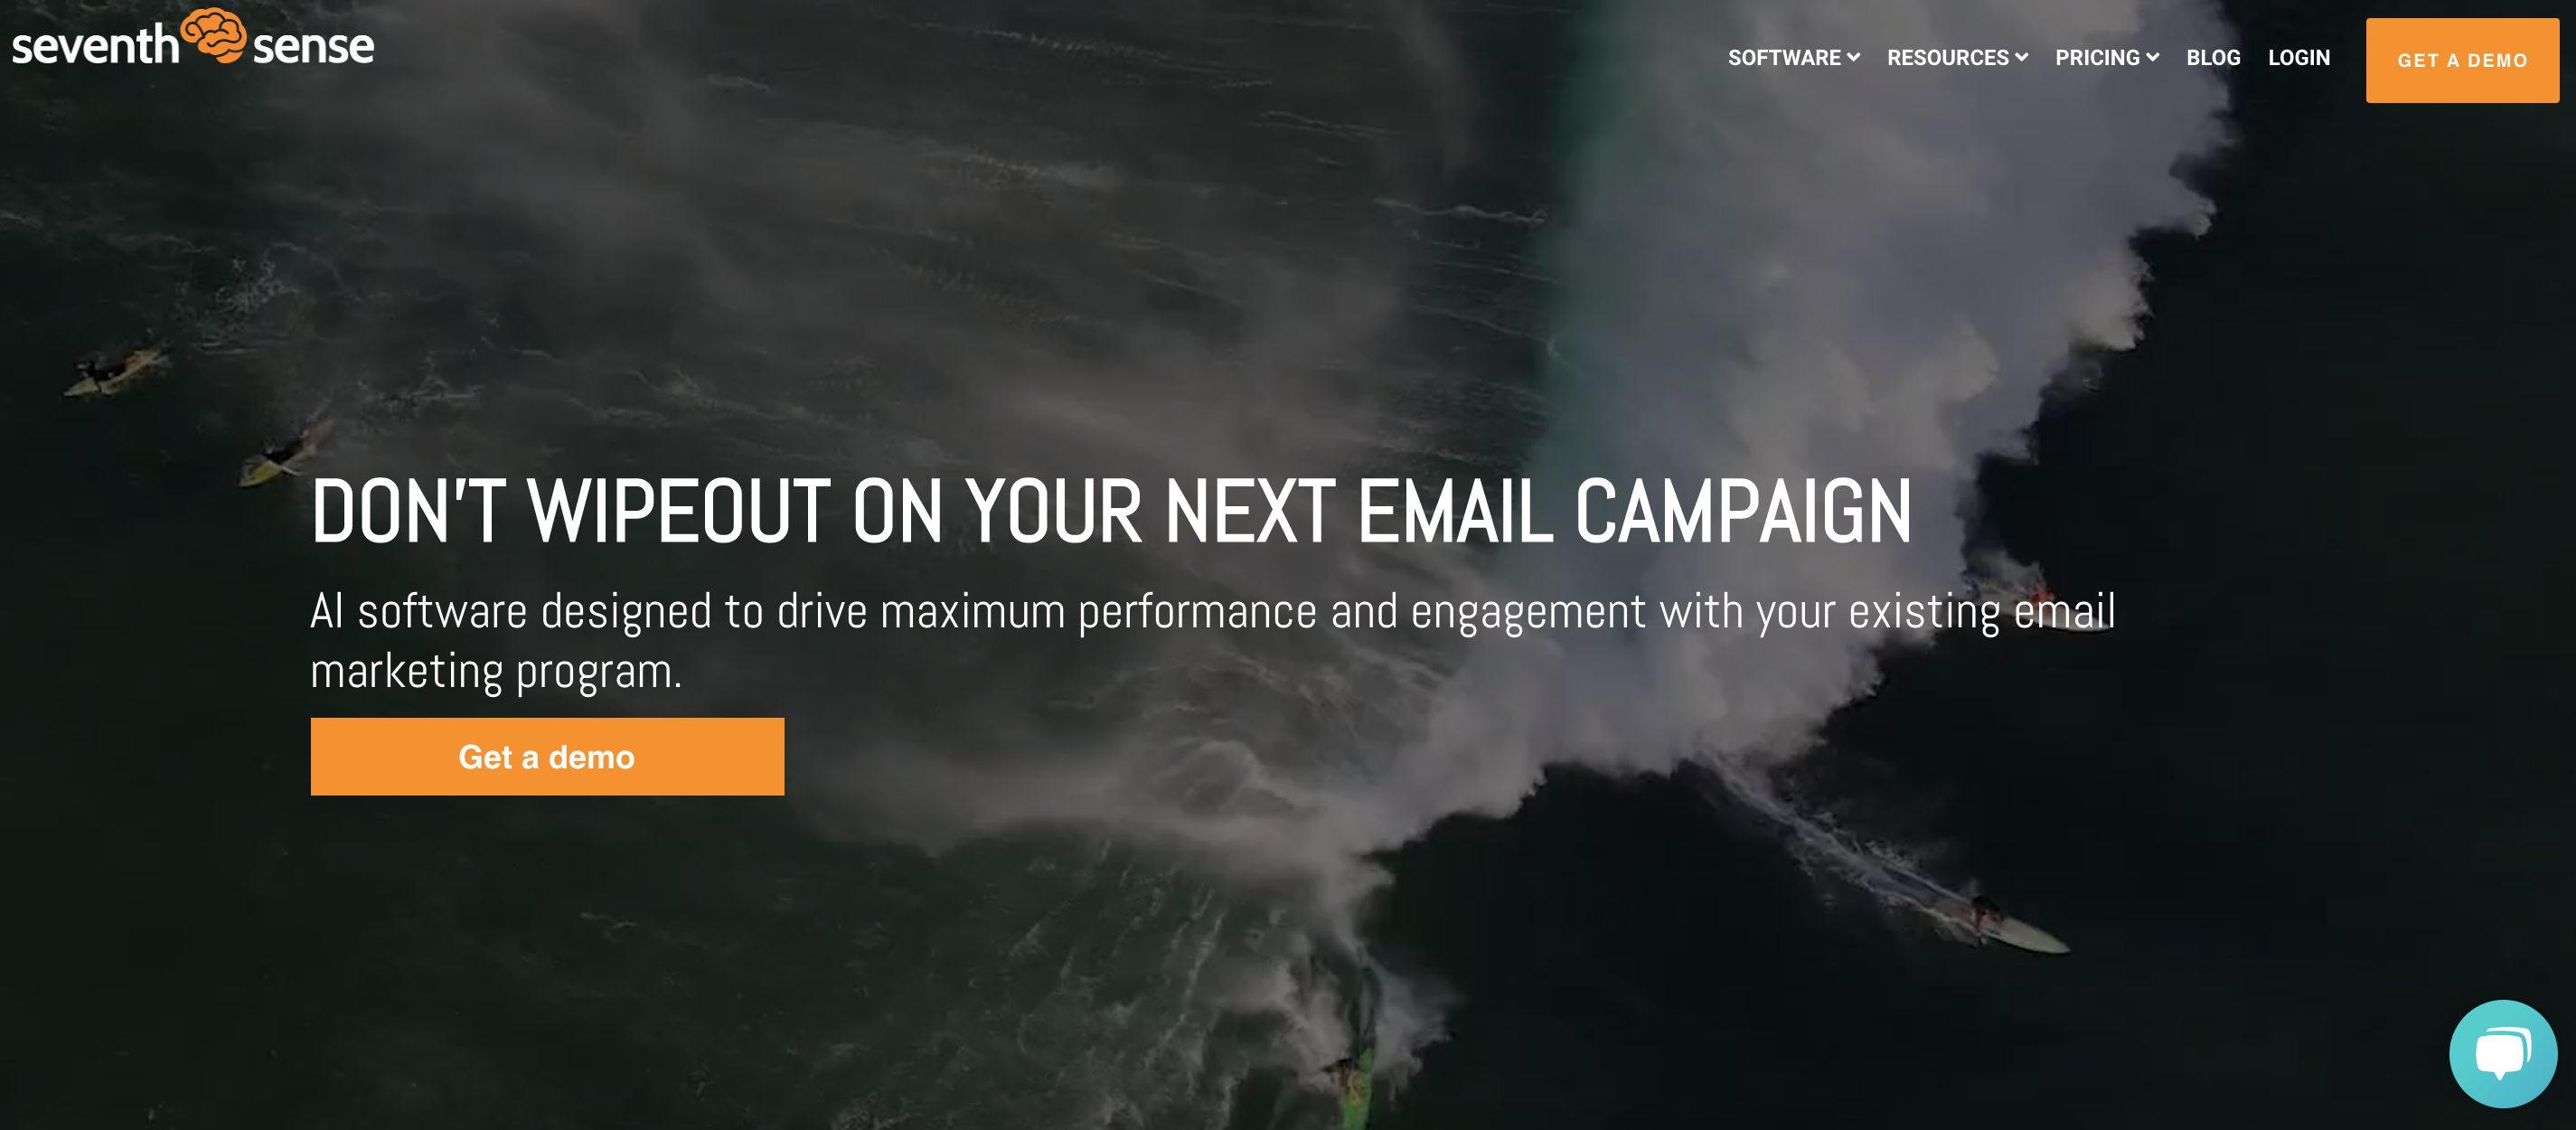 Seventh Sense is an email marketing software that automates sending at the perfect times